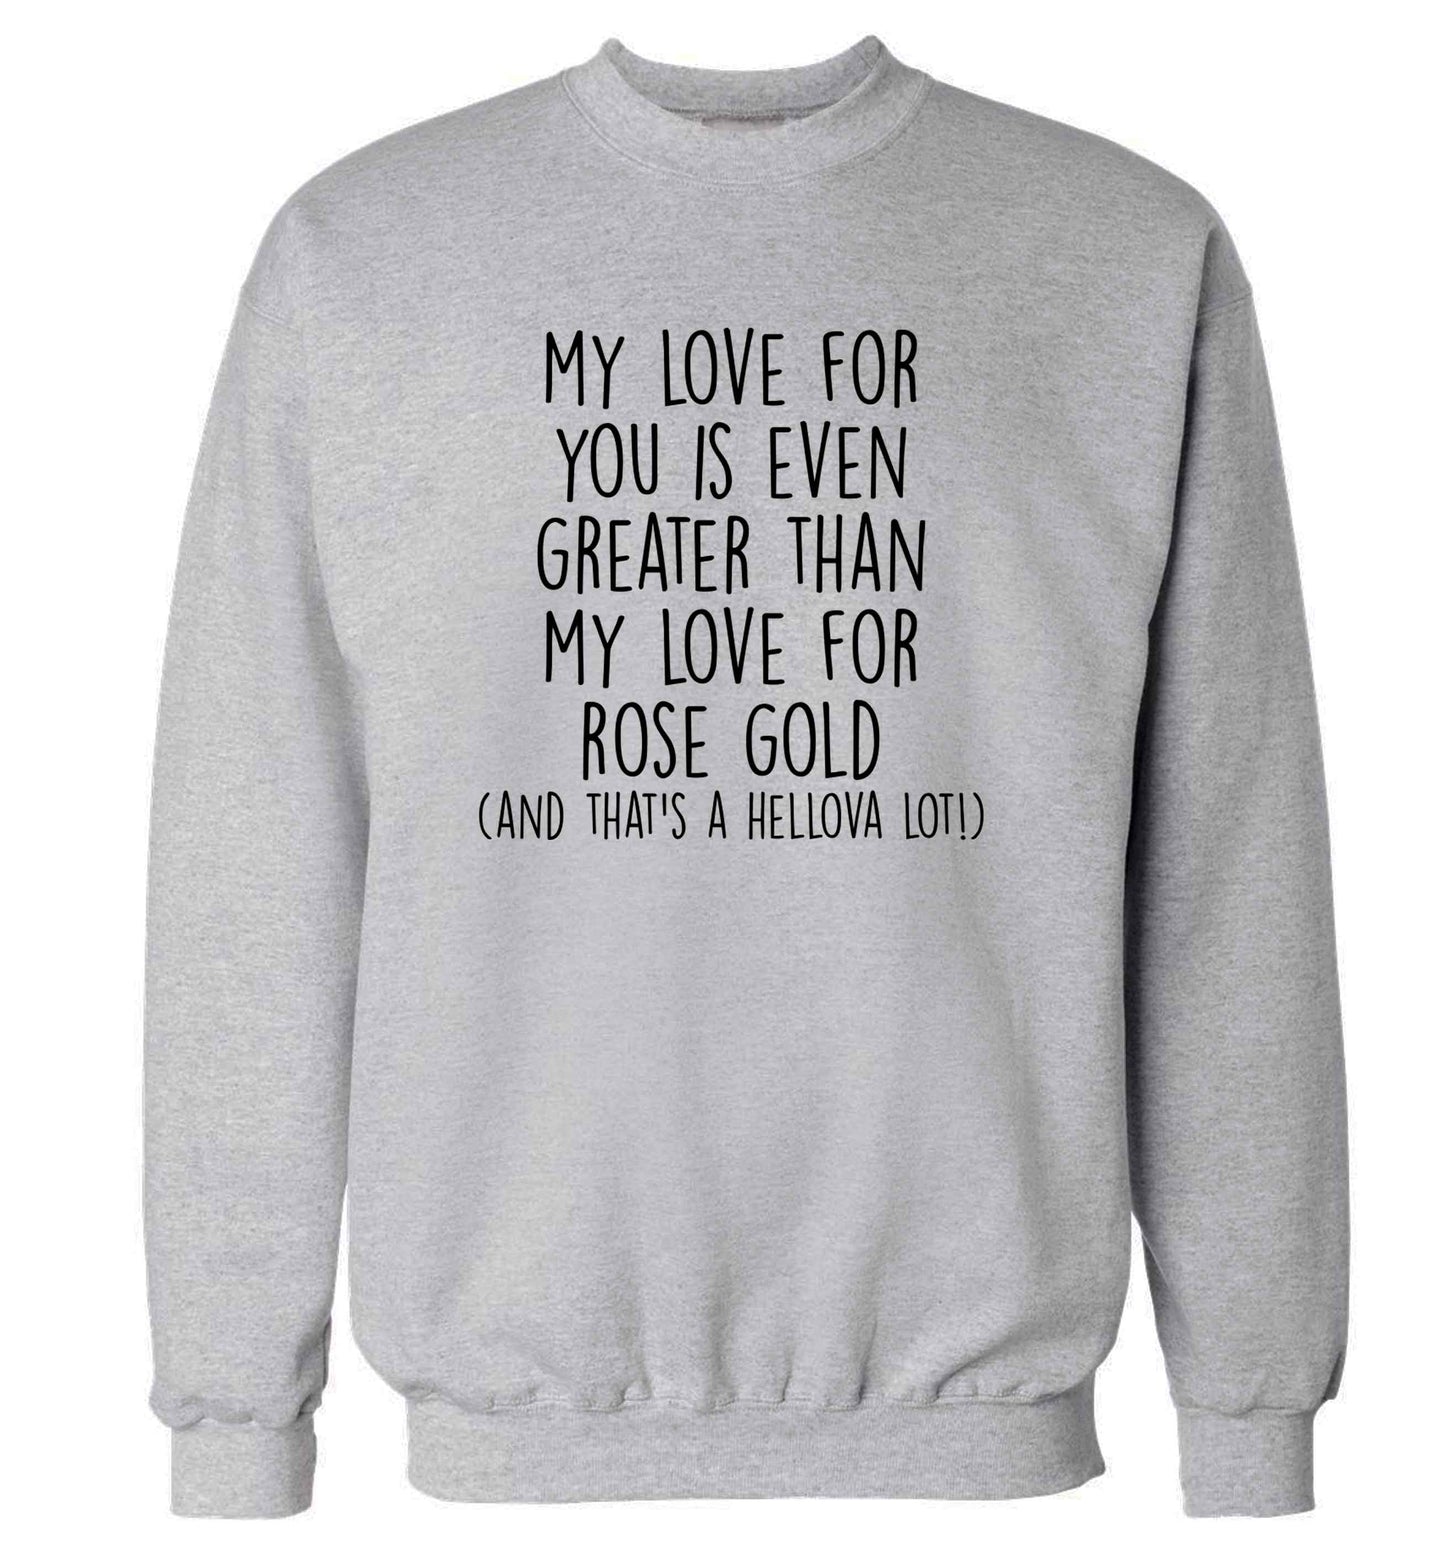 My love for you is even greater than my love for rose gold (and that's a hellova lot) adult's unisex grey sweater 2XL